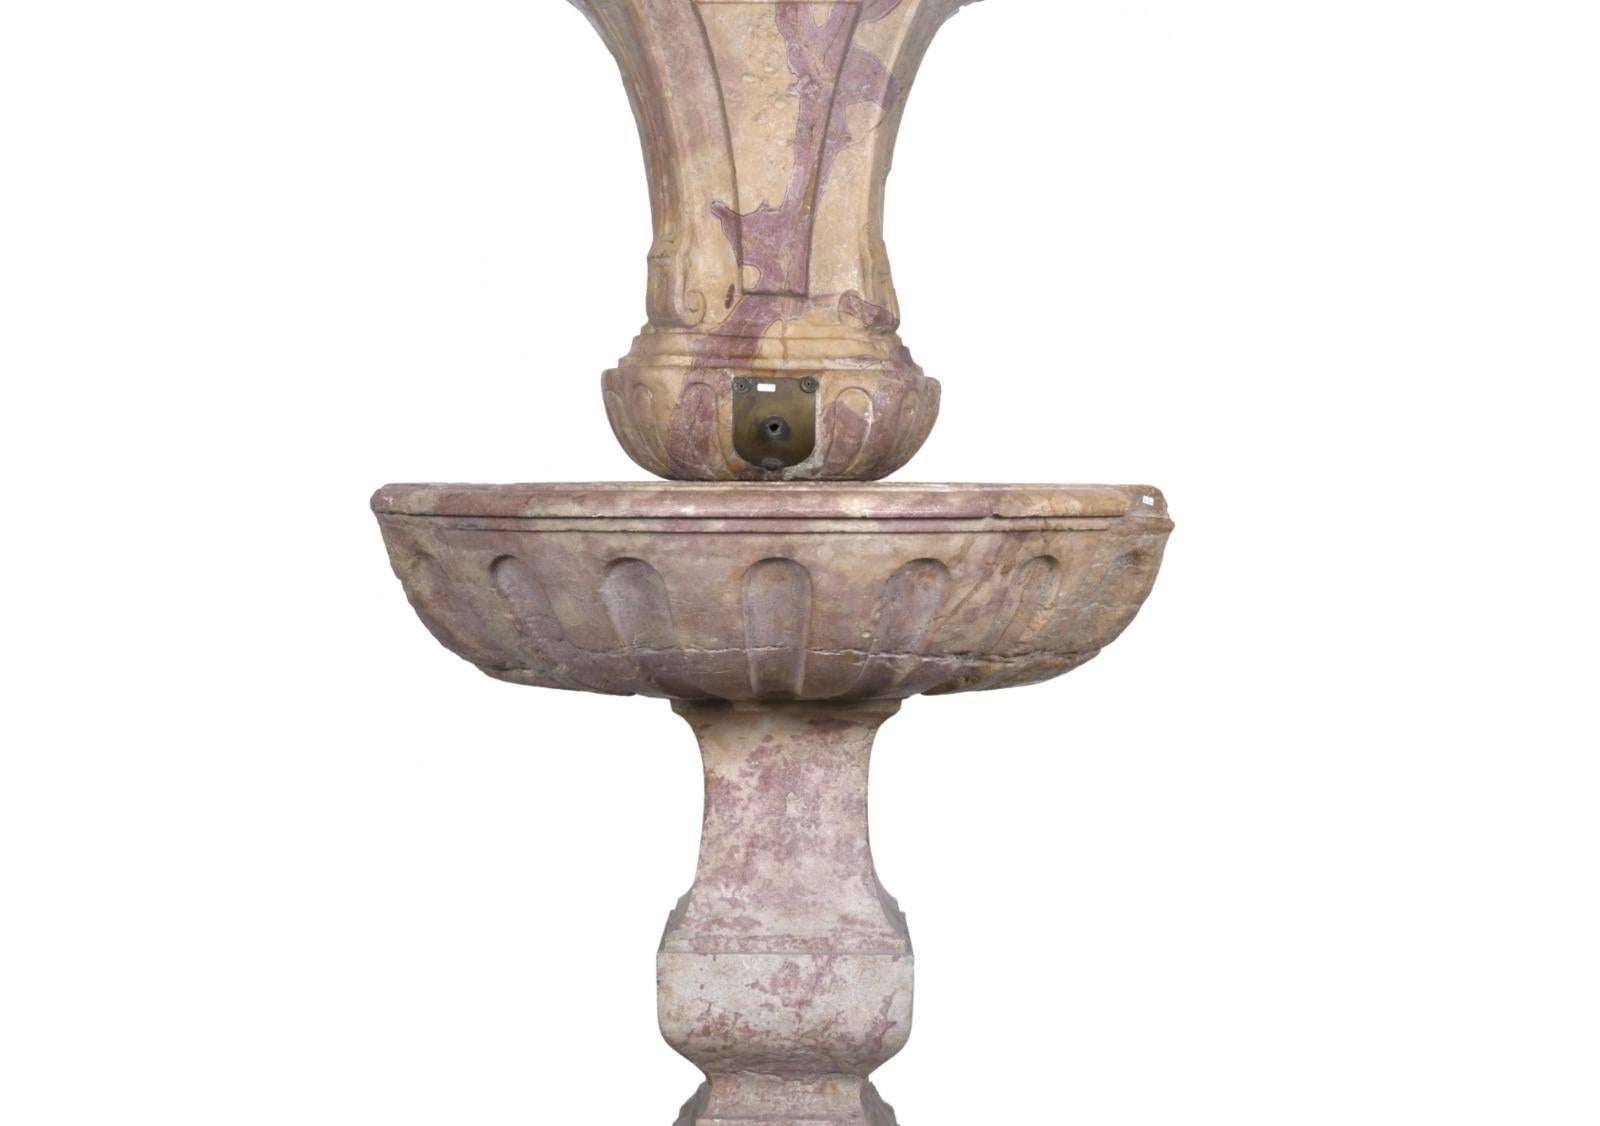 Italian Corner Fountain
18th century
In burgundy stone.
Divided into three parts.
Measures: 172 x 89 x 72 cms. total
Very good condition.